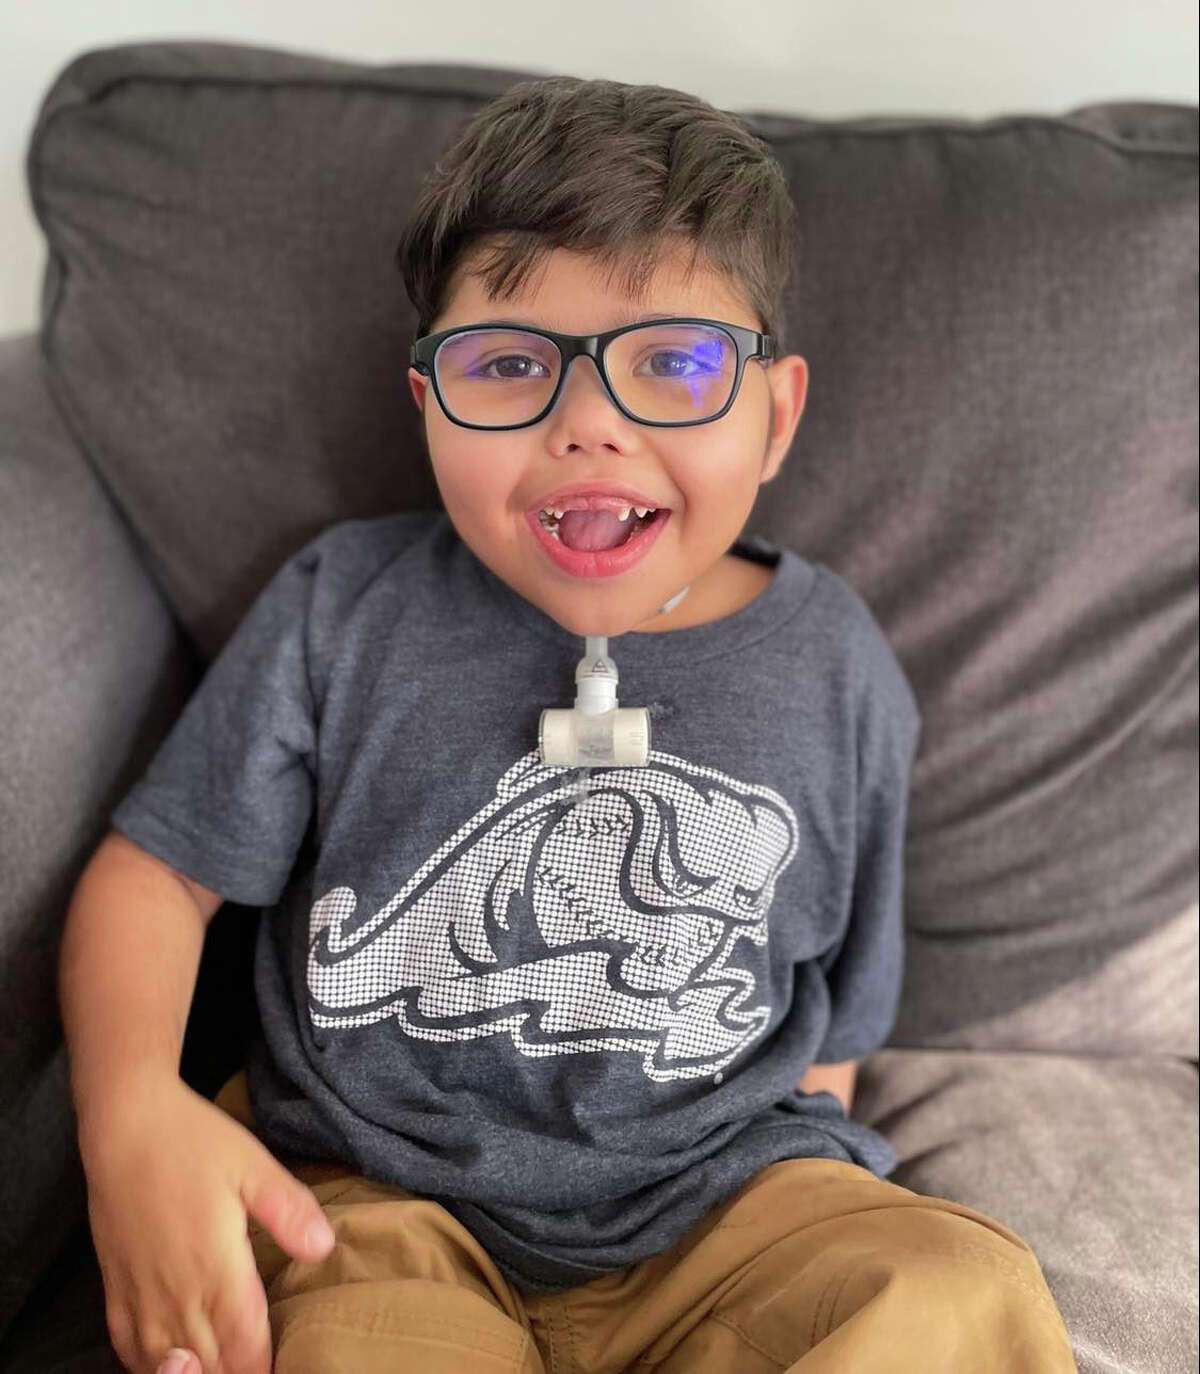 On Nov. 27, Anderson Moreno, a 6-year-old-boy from Big Rapids who has been fighting dilated cardiomyopathy, received a new donor kidney thanks to the doctors and nurses at Helen DeVos Children’s Hospital in Grand Rapids.